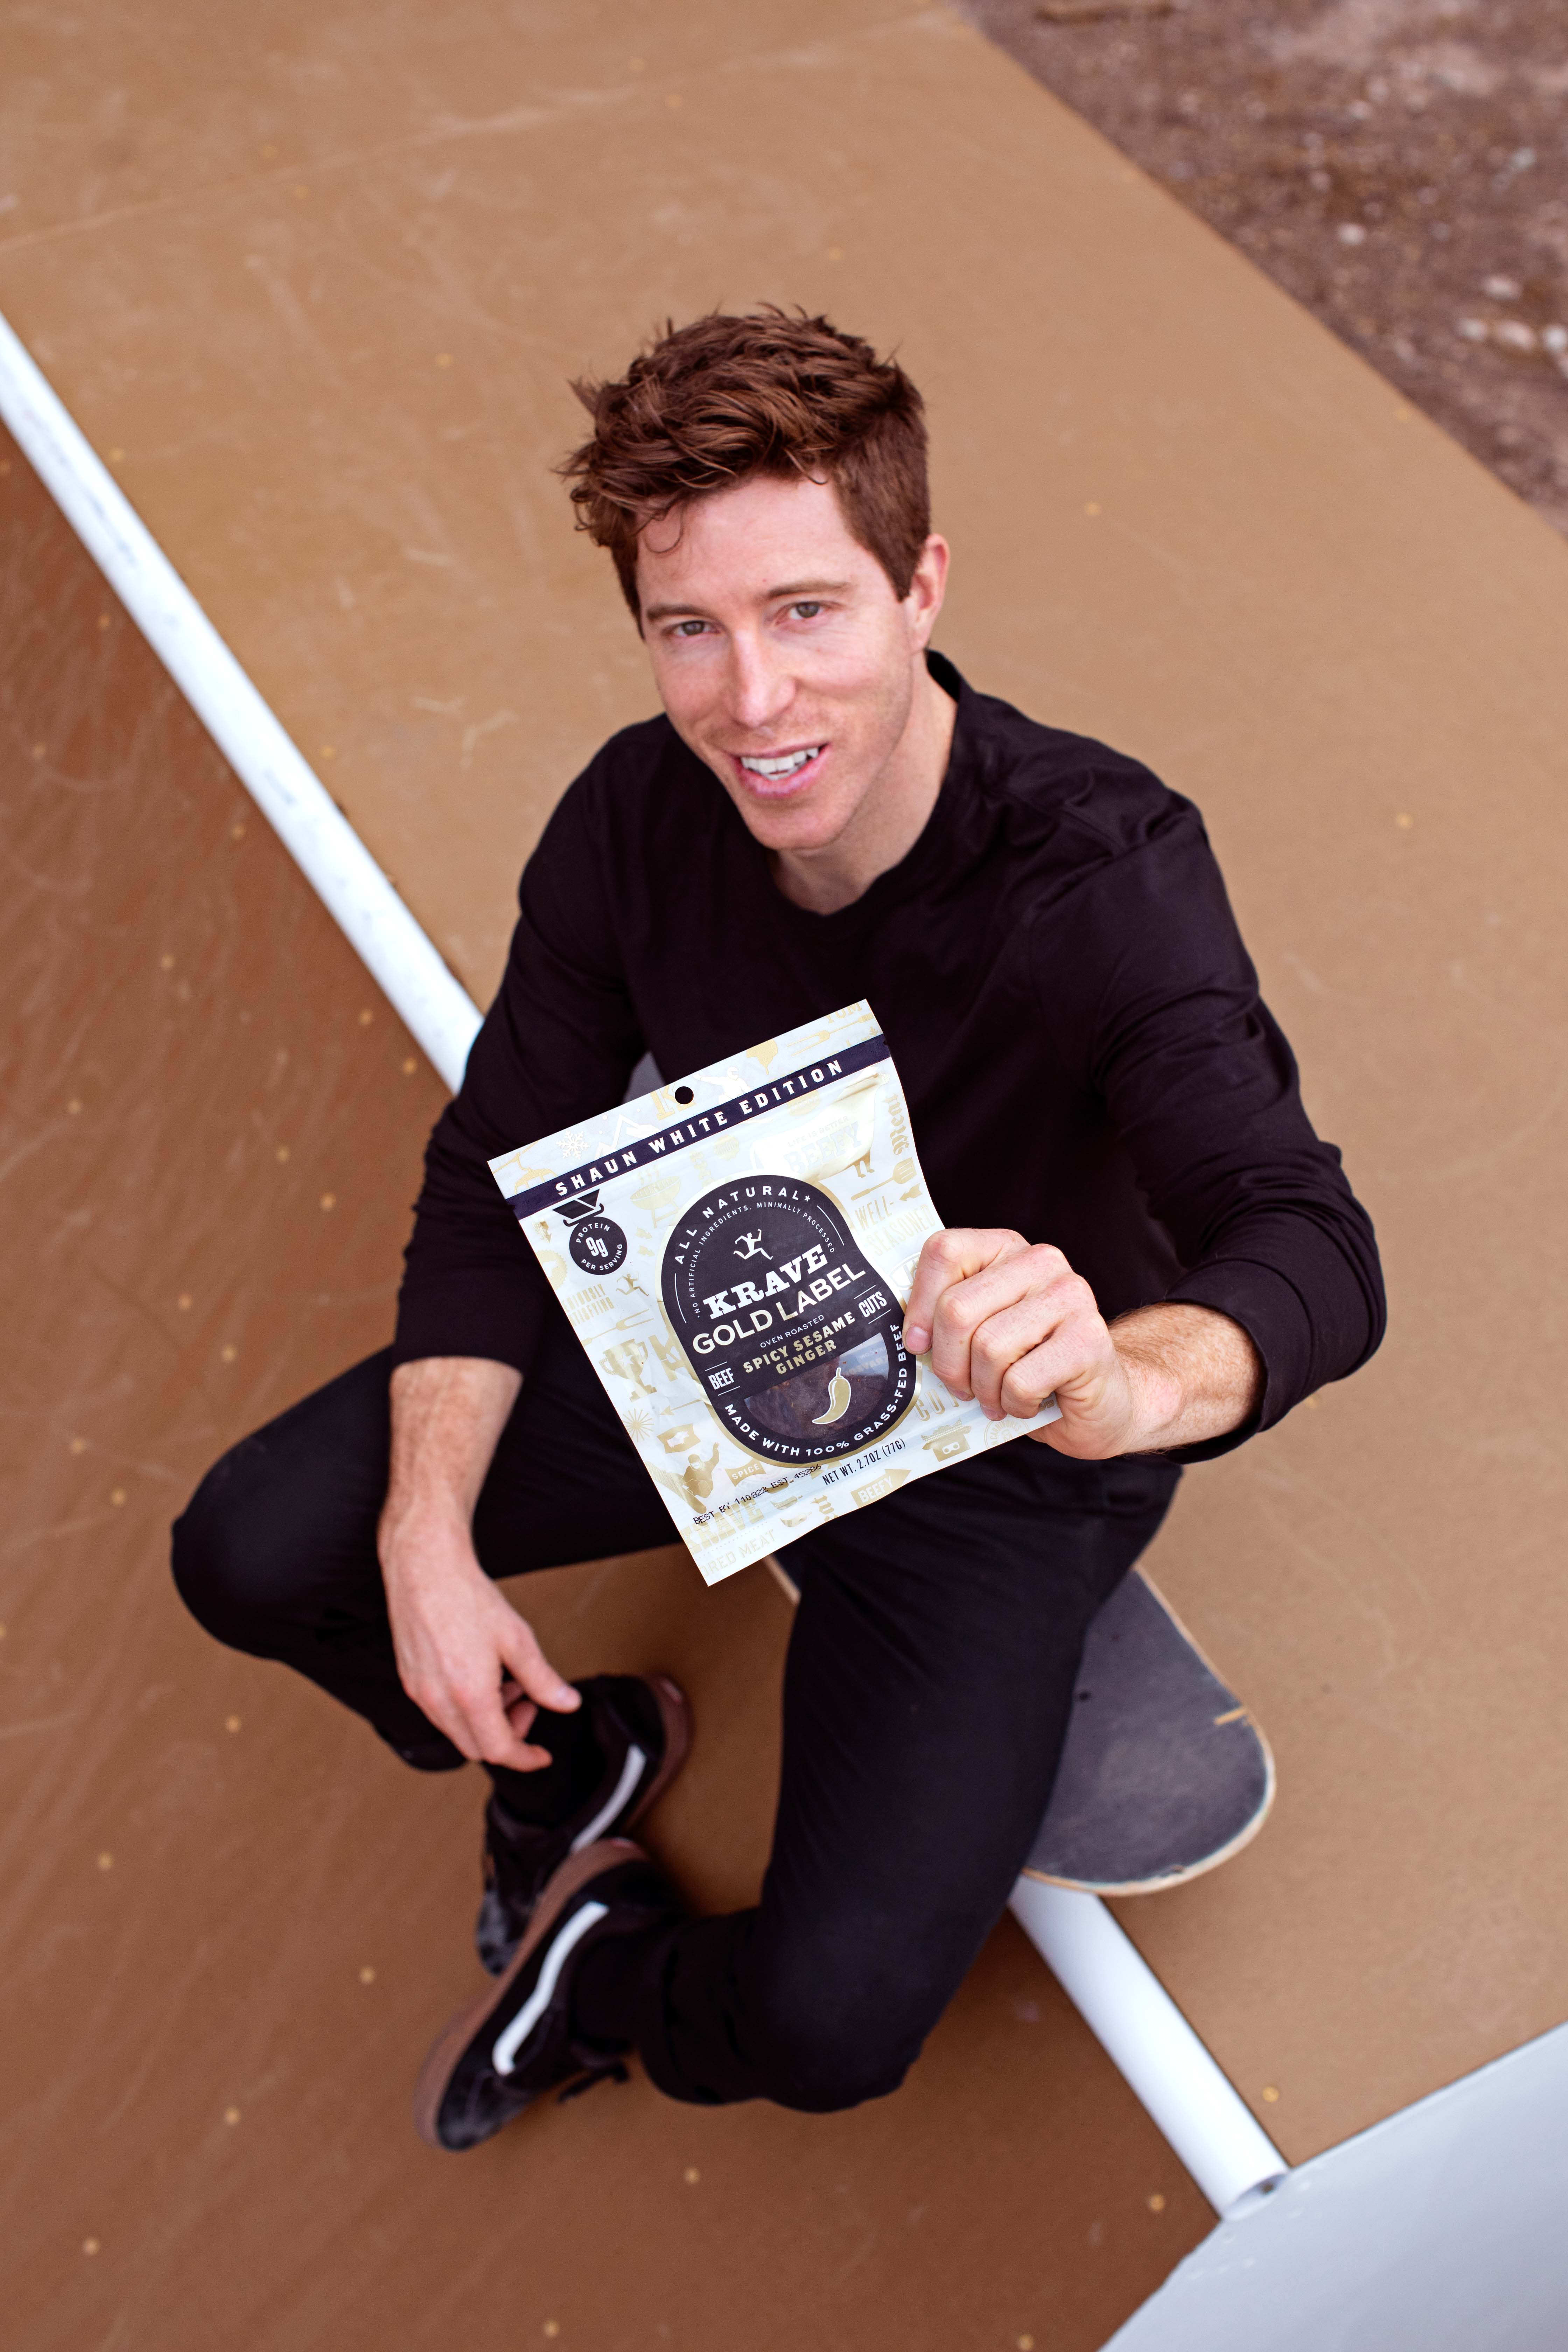 Shaun White Debuts New Snowboard to Launch Active Lifestyle Brand